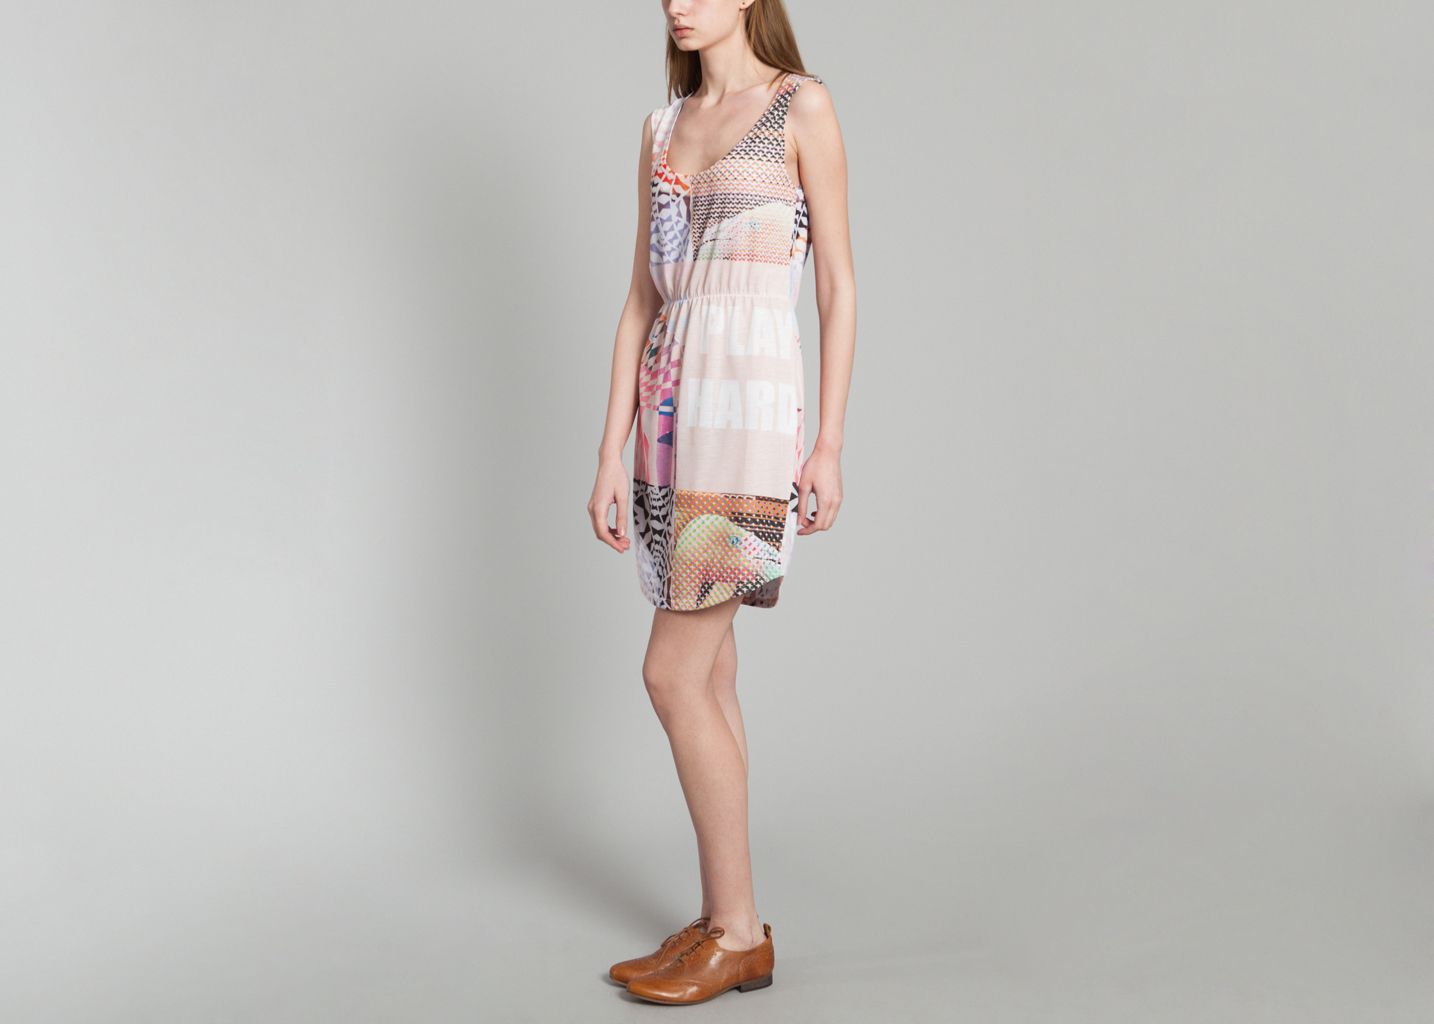 Mimosa Dress April, May Peach L'Exception